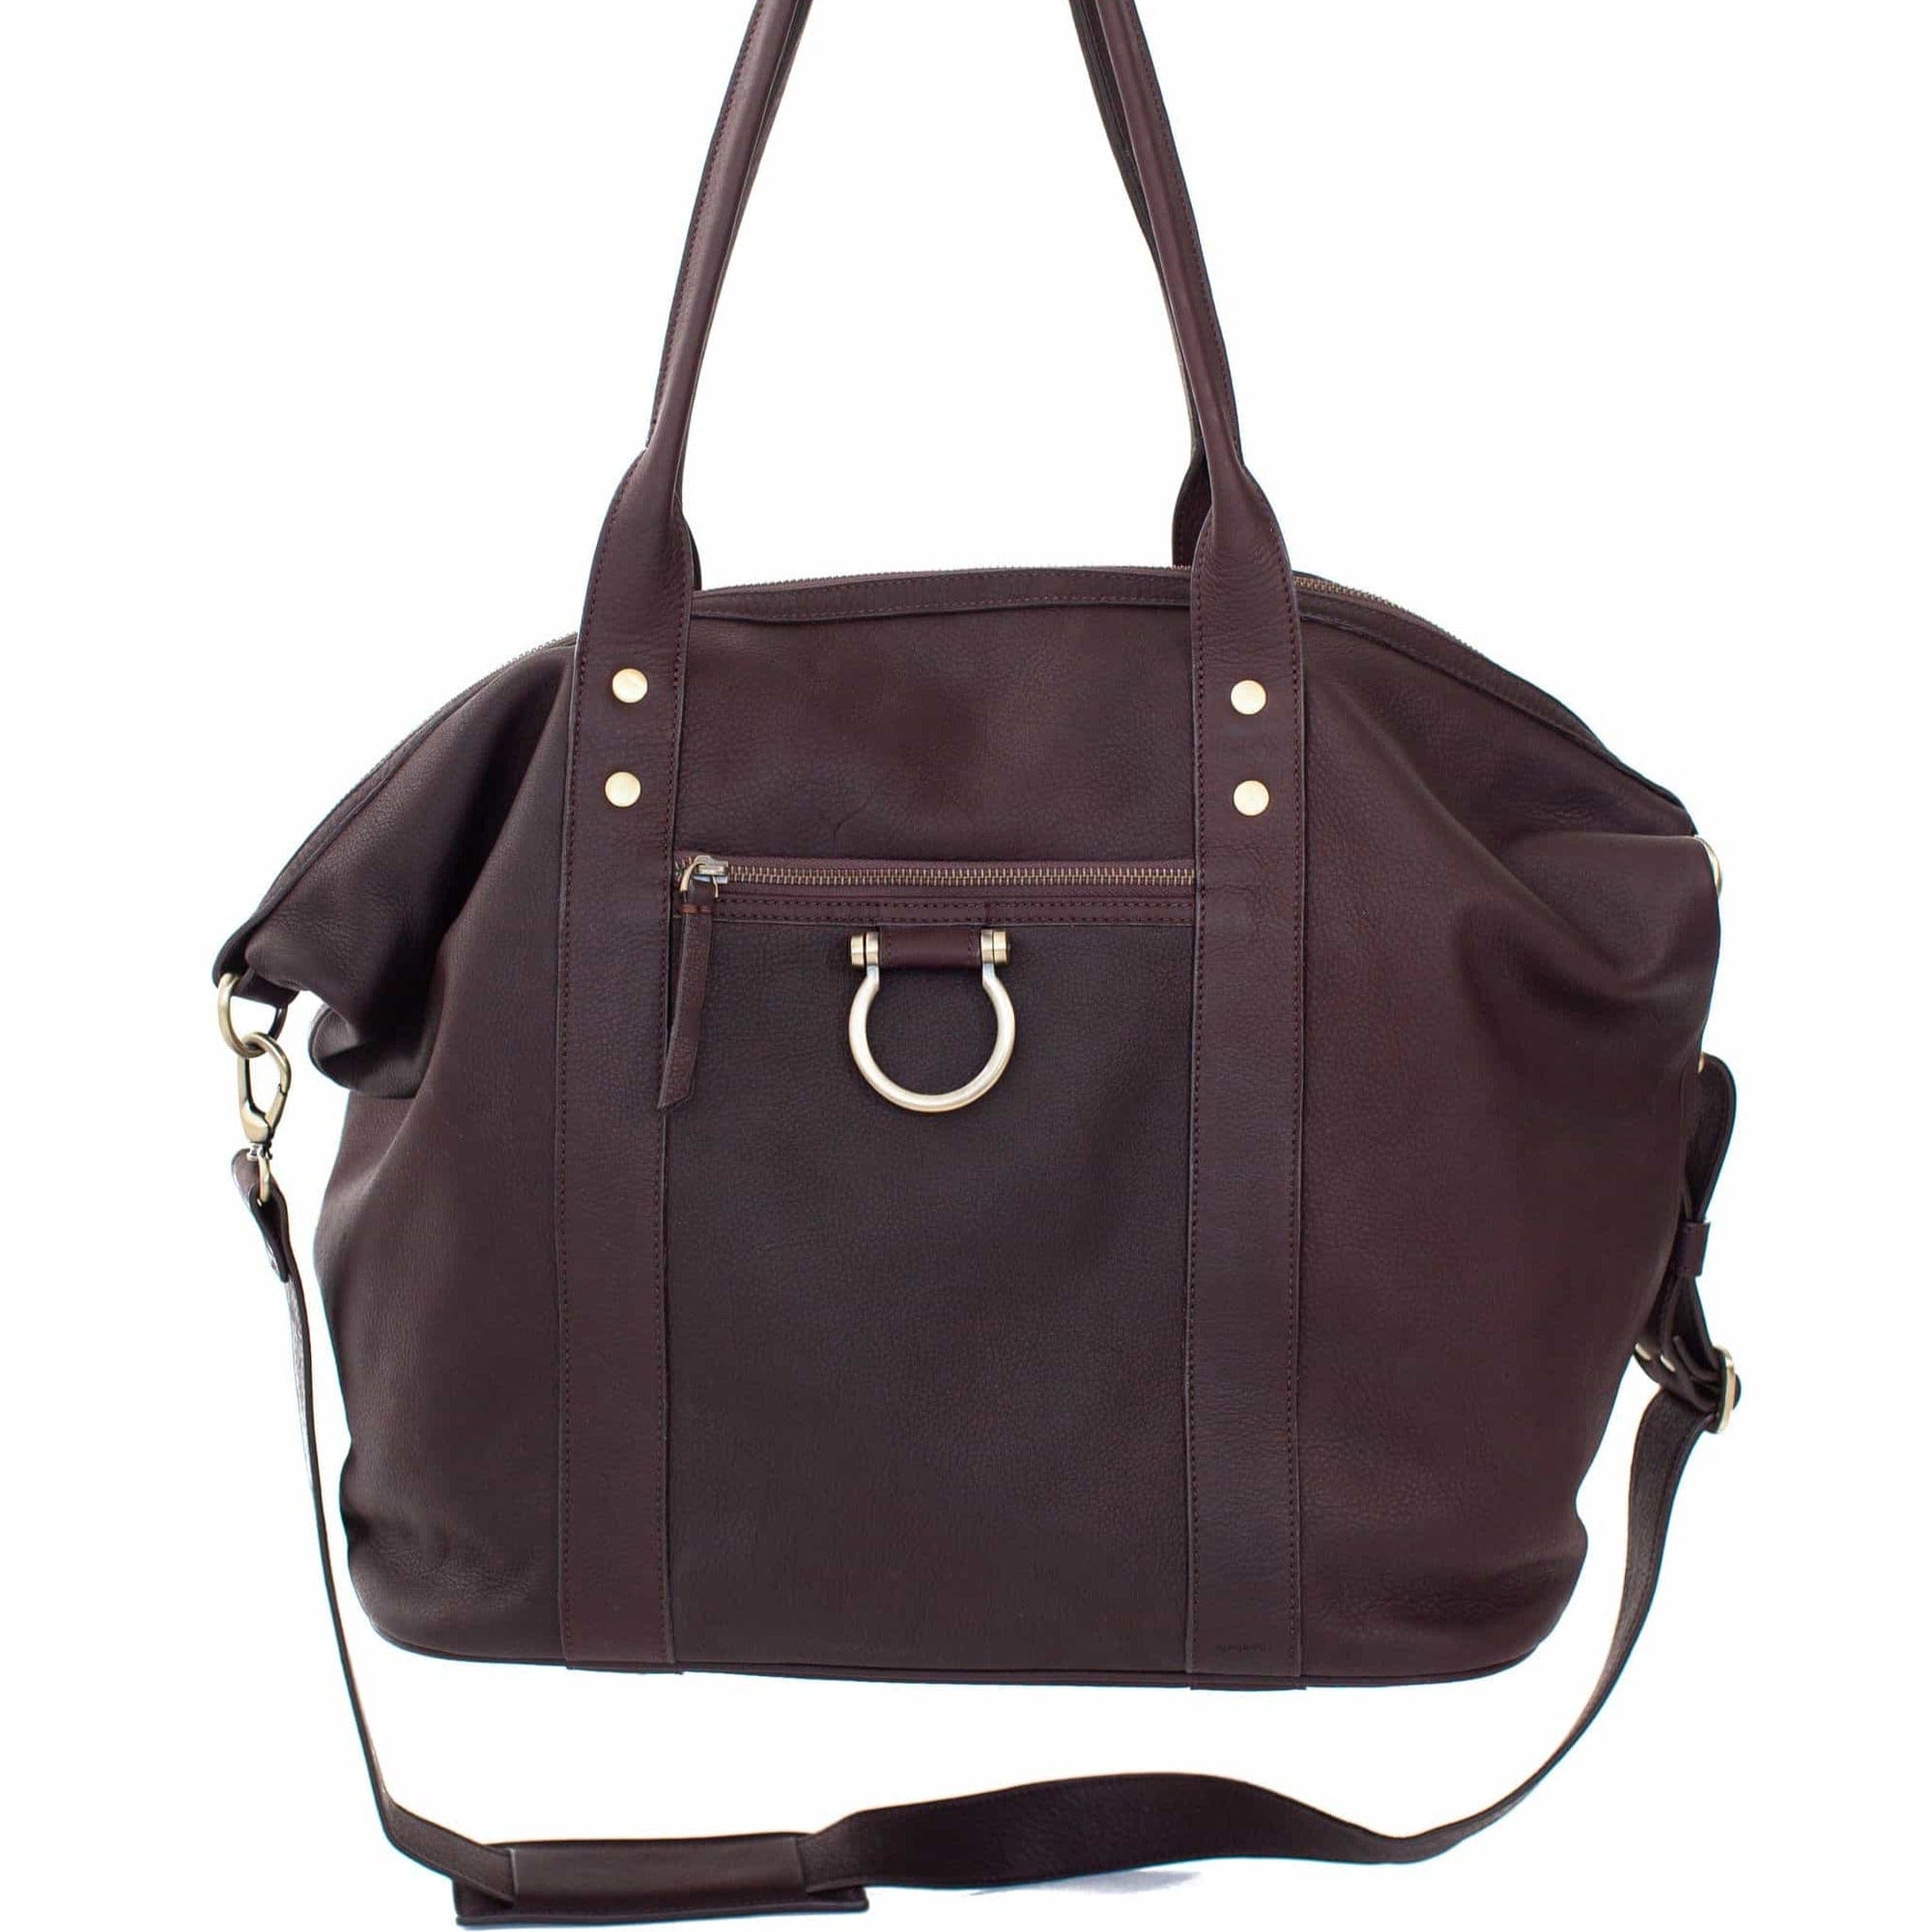 The So Honey weekender in chocolate brown raw leather is the perfect tote bag for travel and everyday use with a large main compartment.